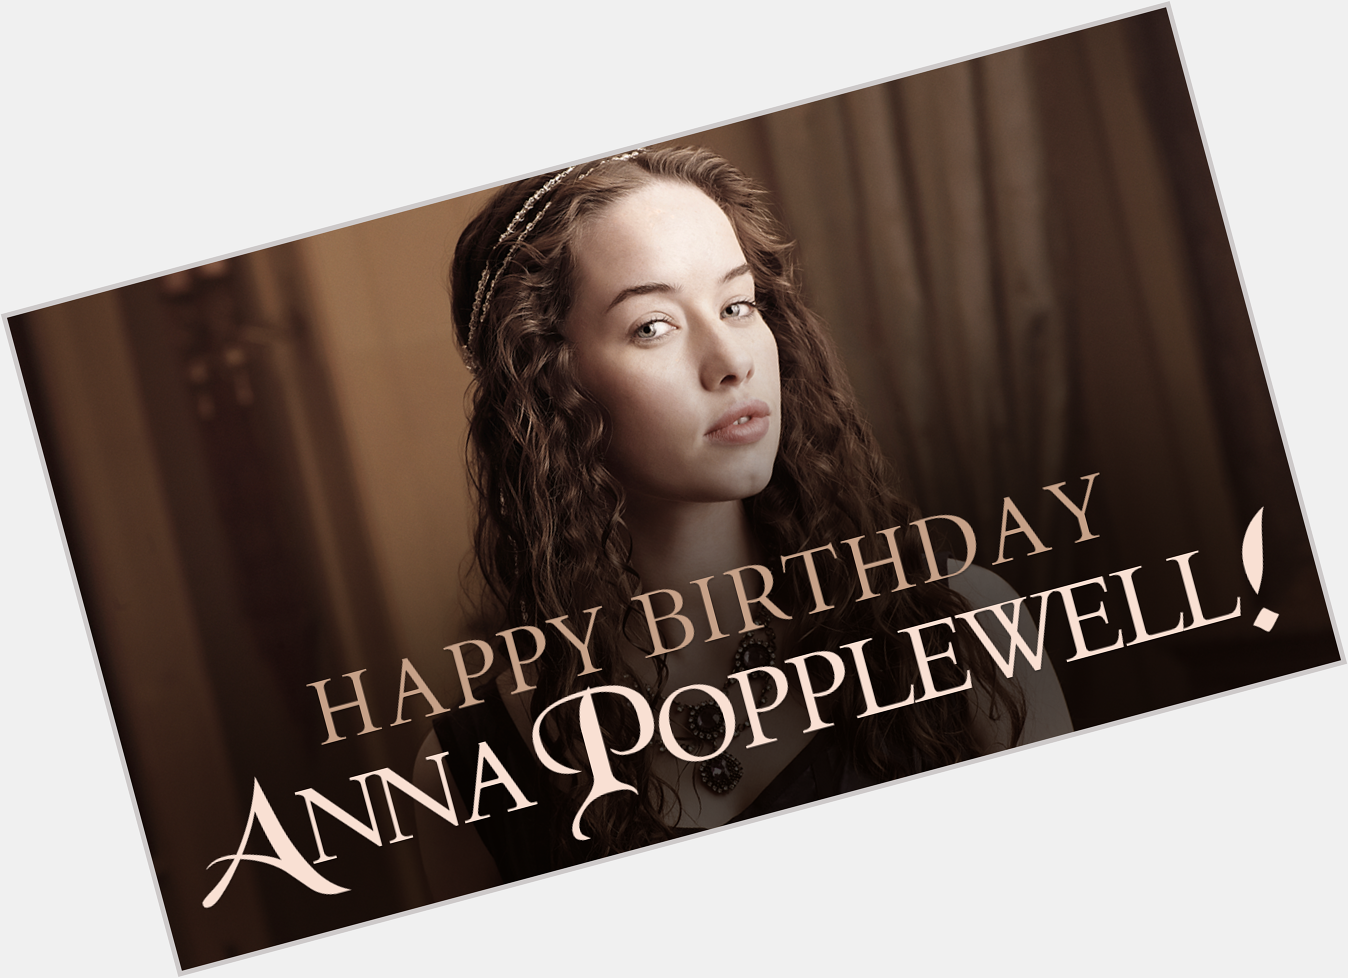 Happy birthday to the star! Today is your day, Anna Popplewell! Bathe in the birthday glory! 